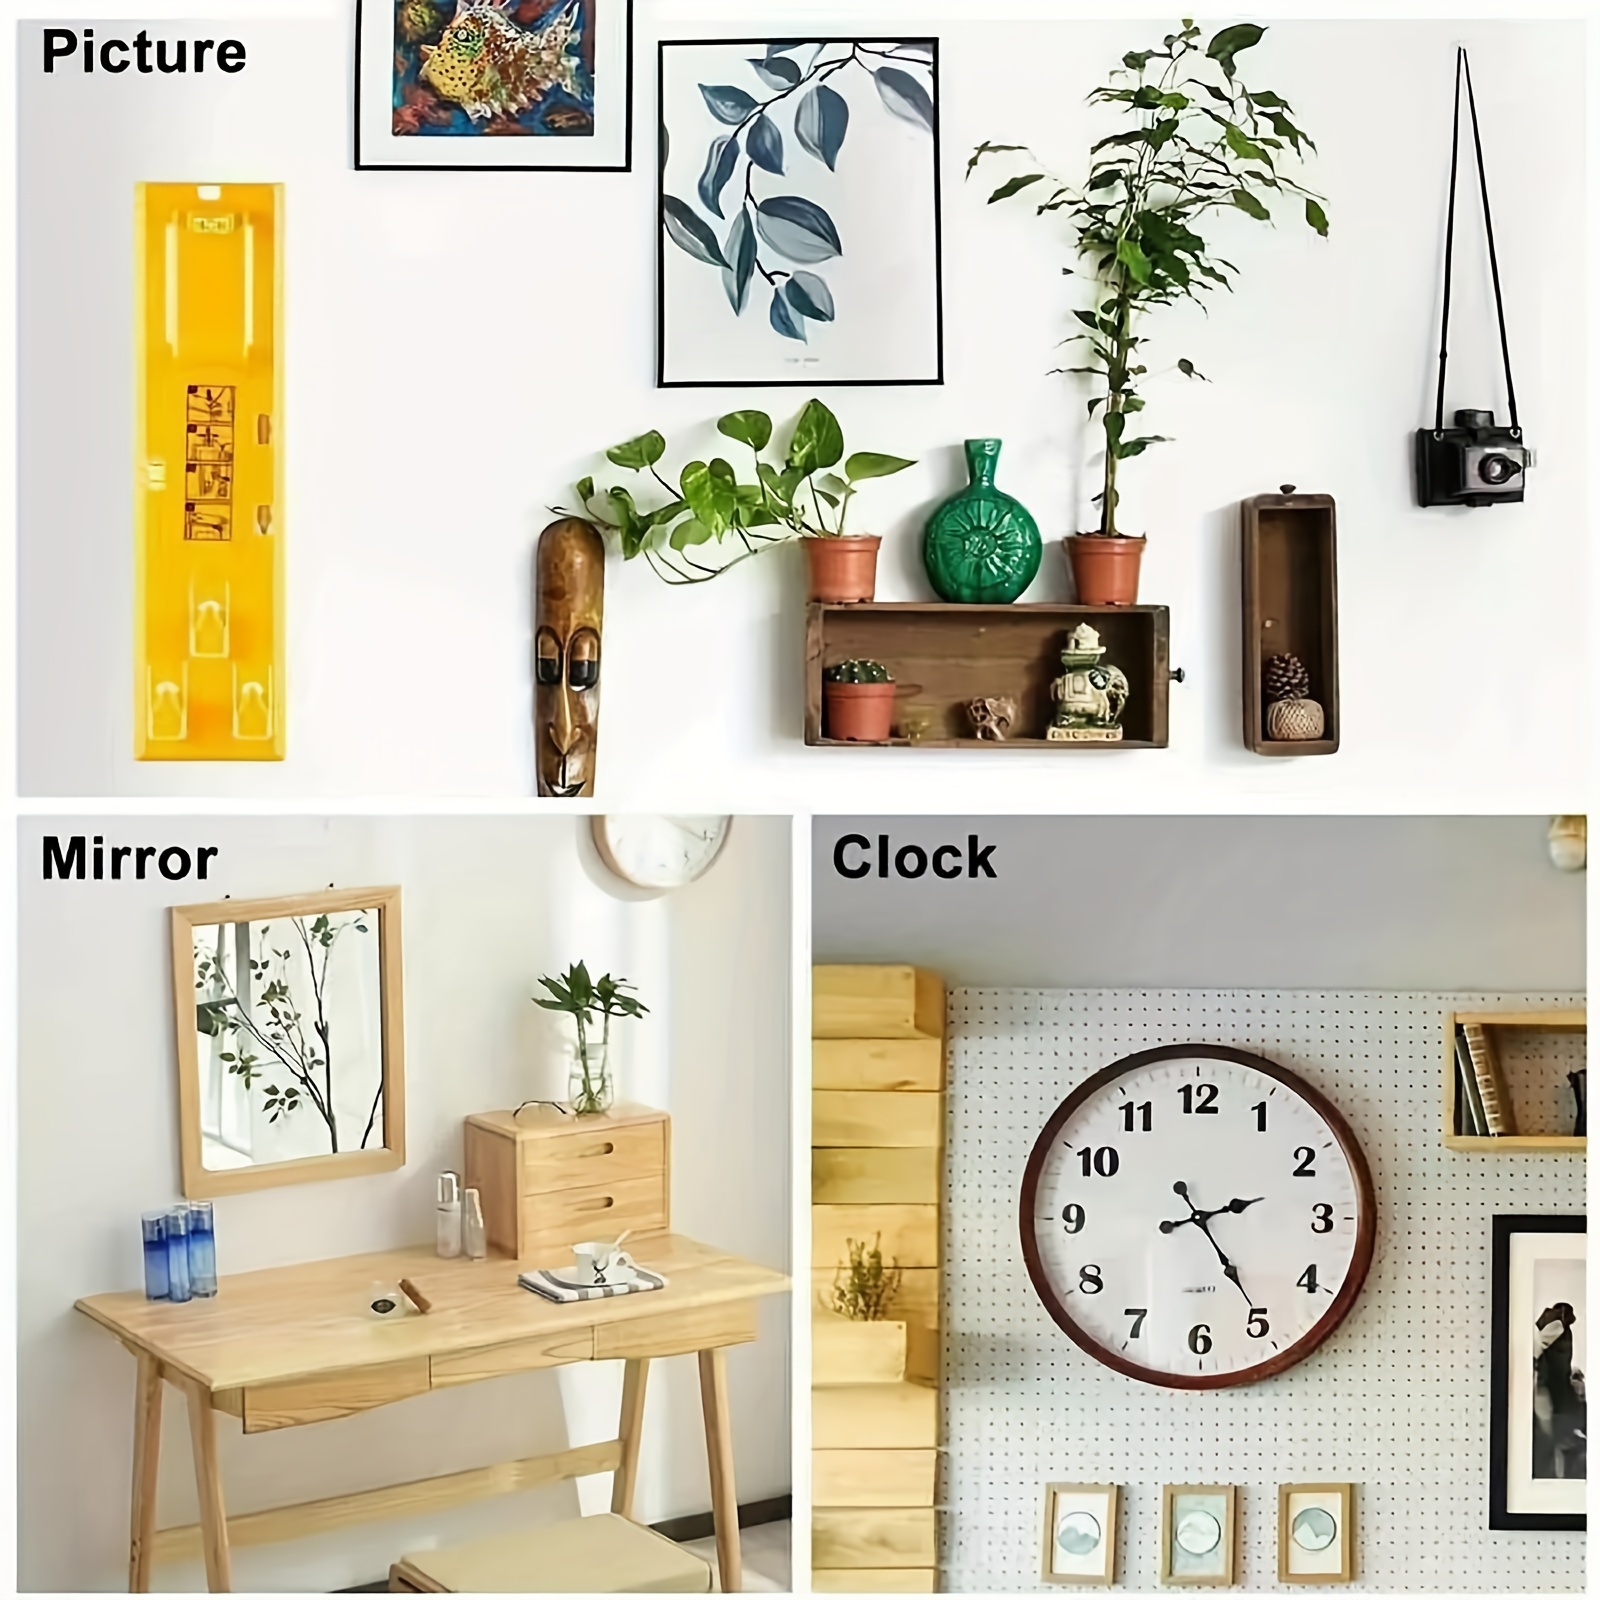 Picture Hanging Tool, Wall Hanging Kit For Picture With 2 Spirit Levels,  Nails, Hooks, Picture Hanging Wire, And D Ring. Good For Installation Of  The Mirror, Wall Clocks, Display Painting